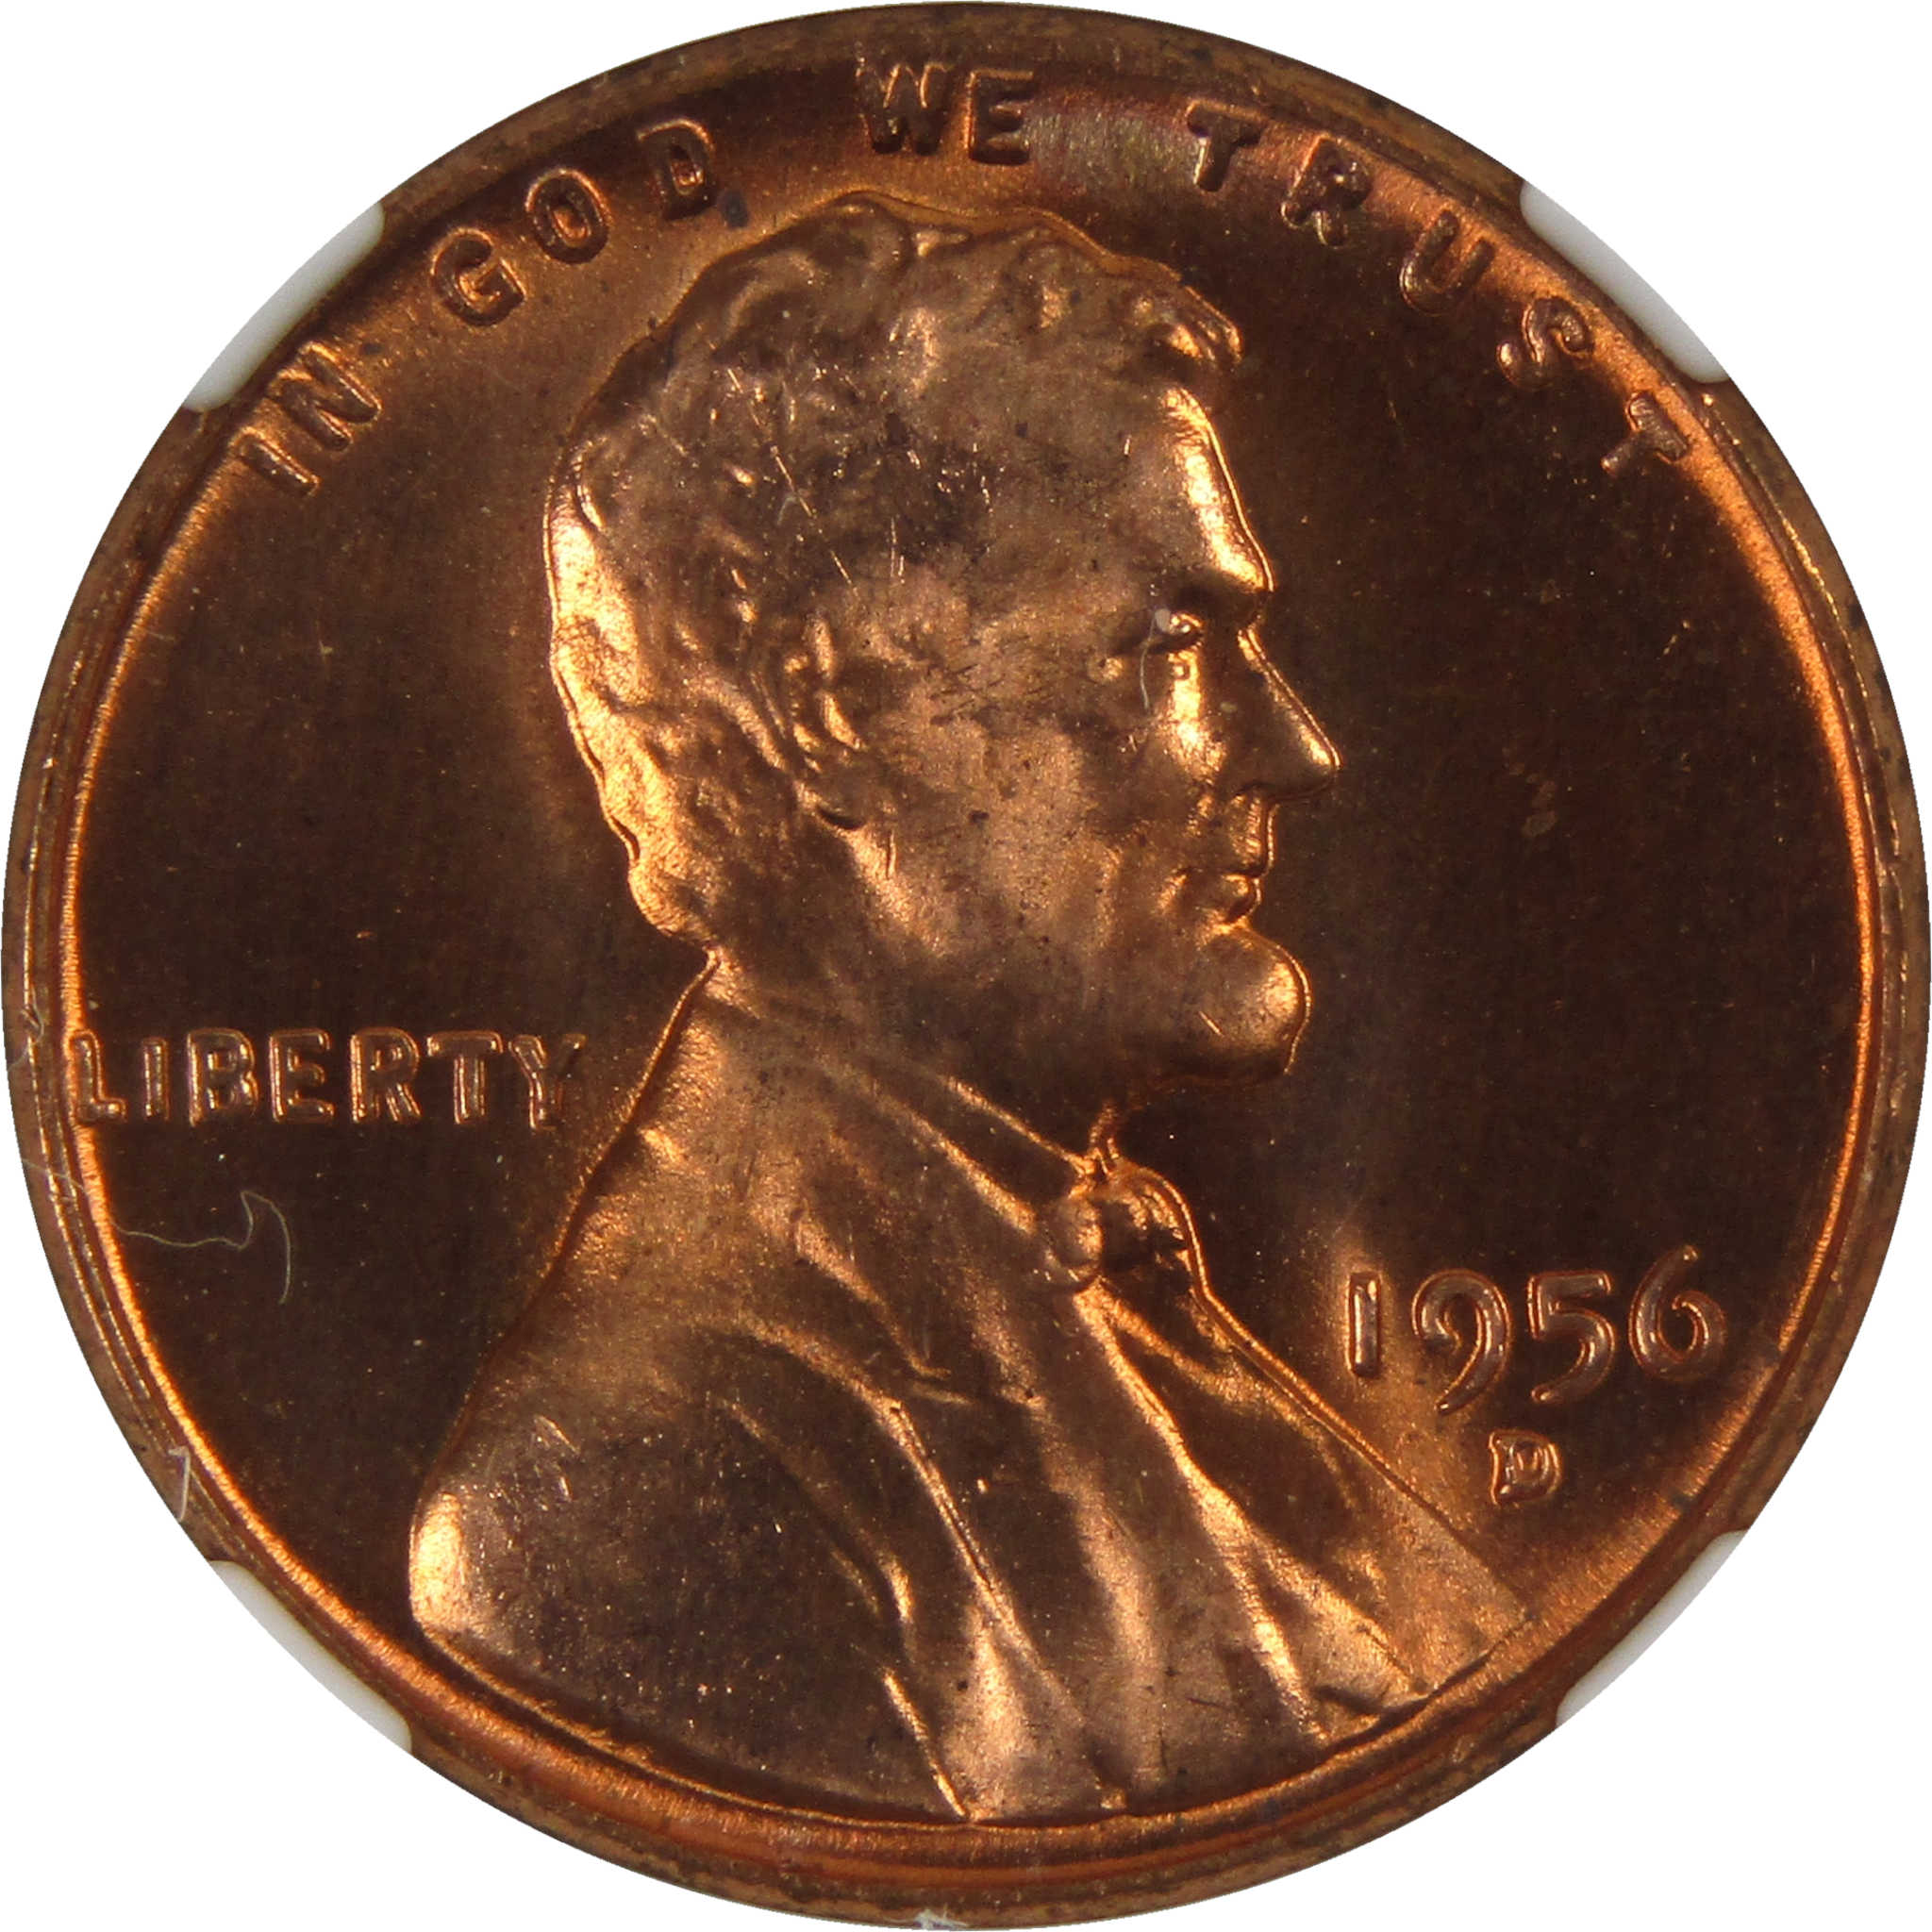 1956 D Lincoln Wheat Cent MS 66 RD NGC Penny Uncirculated SKU:I3663